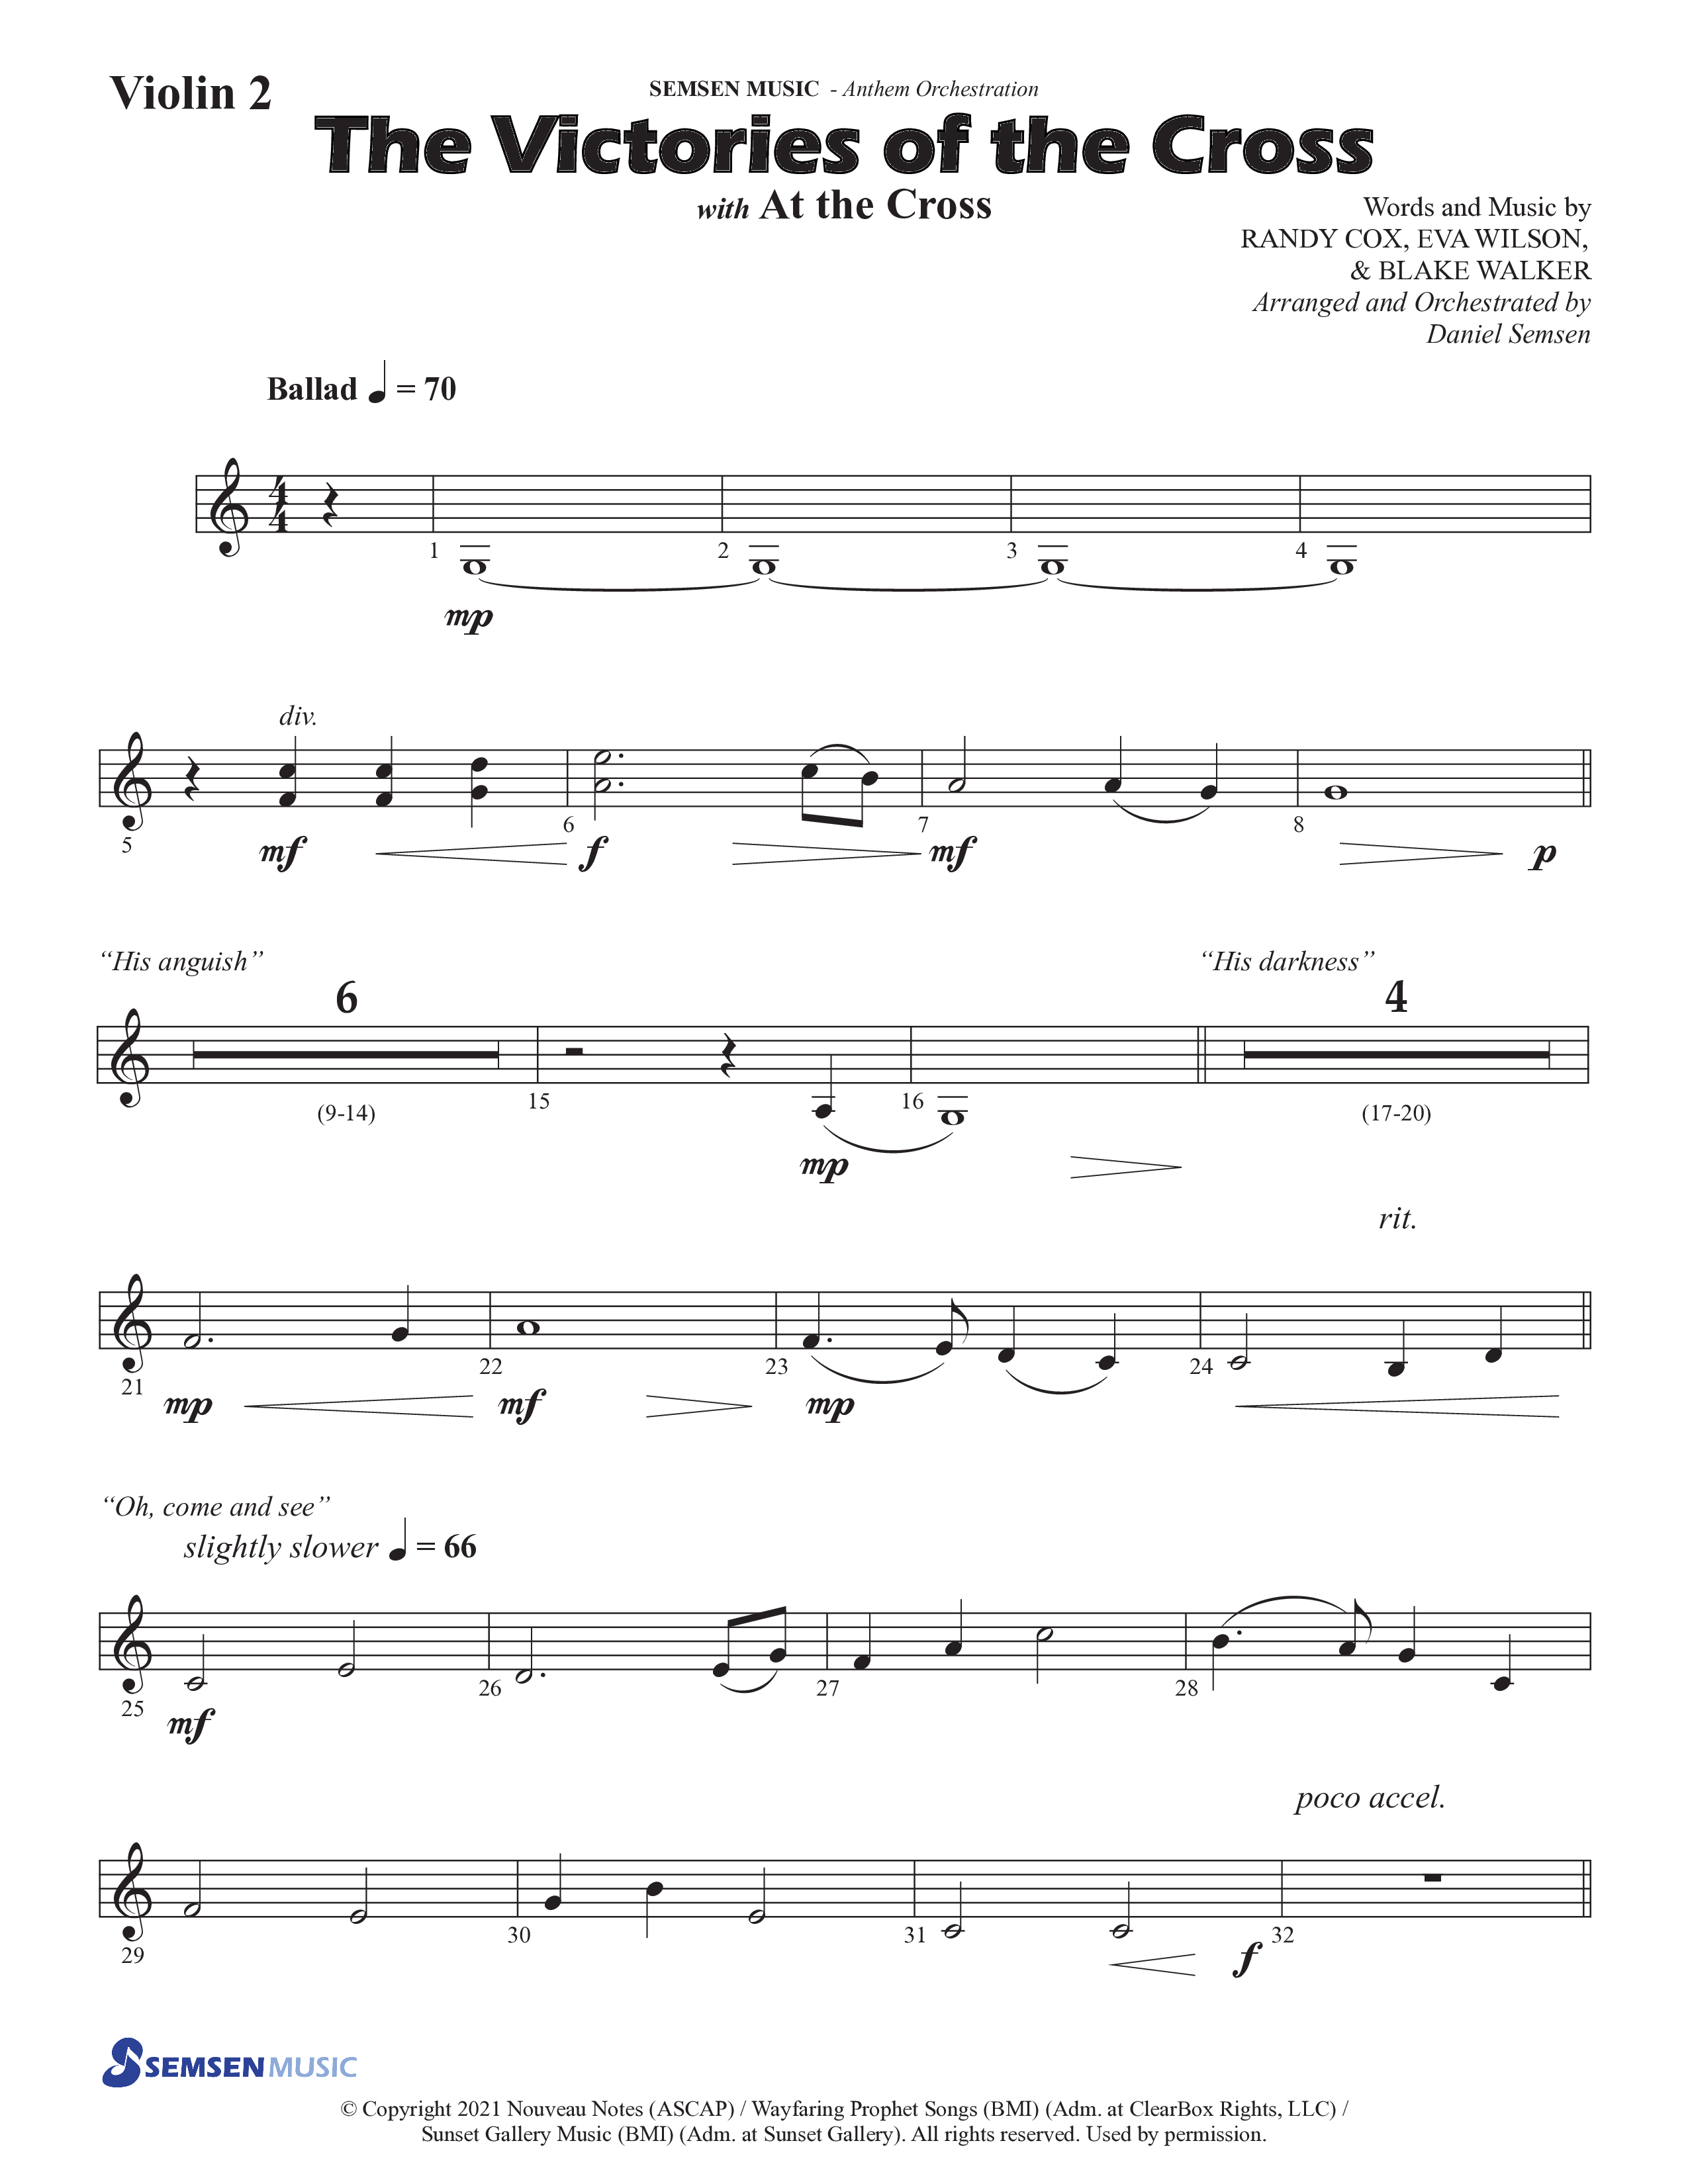 The Victories Of The Cross (with At The Cross) (Choral Anthem SATB) Violin 2 (Semsen Music / Arr. Daniel Semsen)